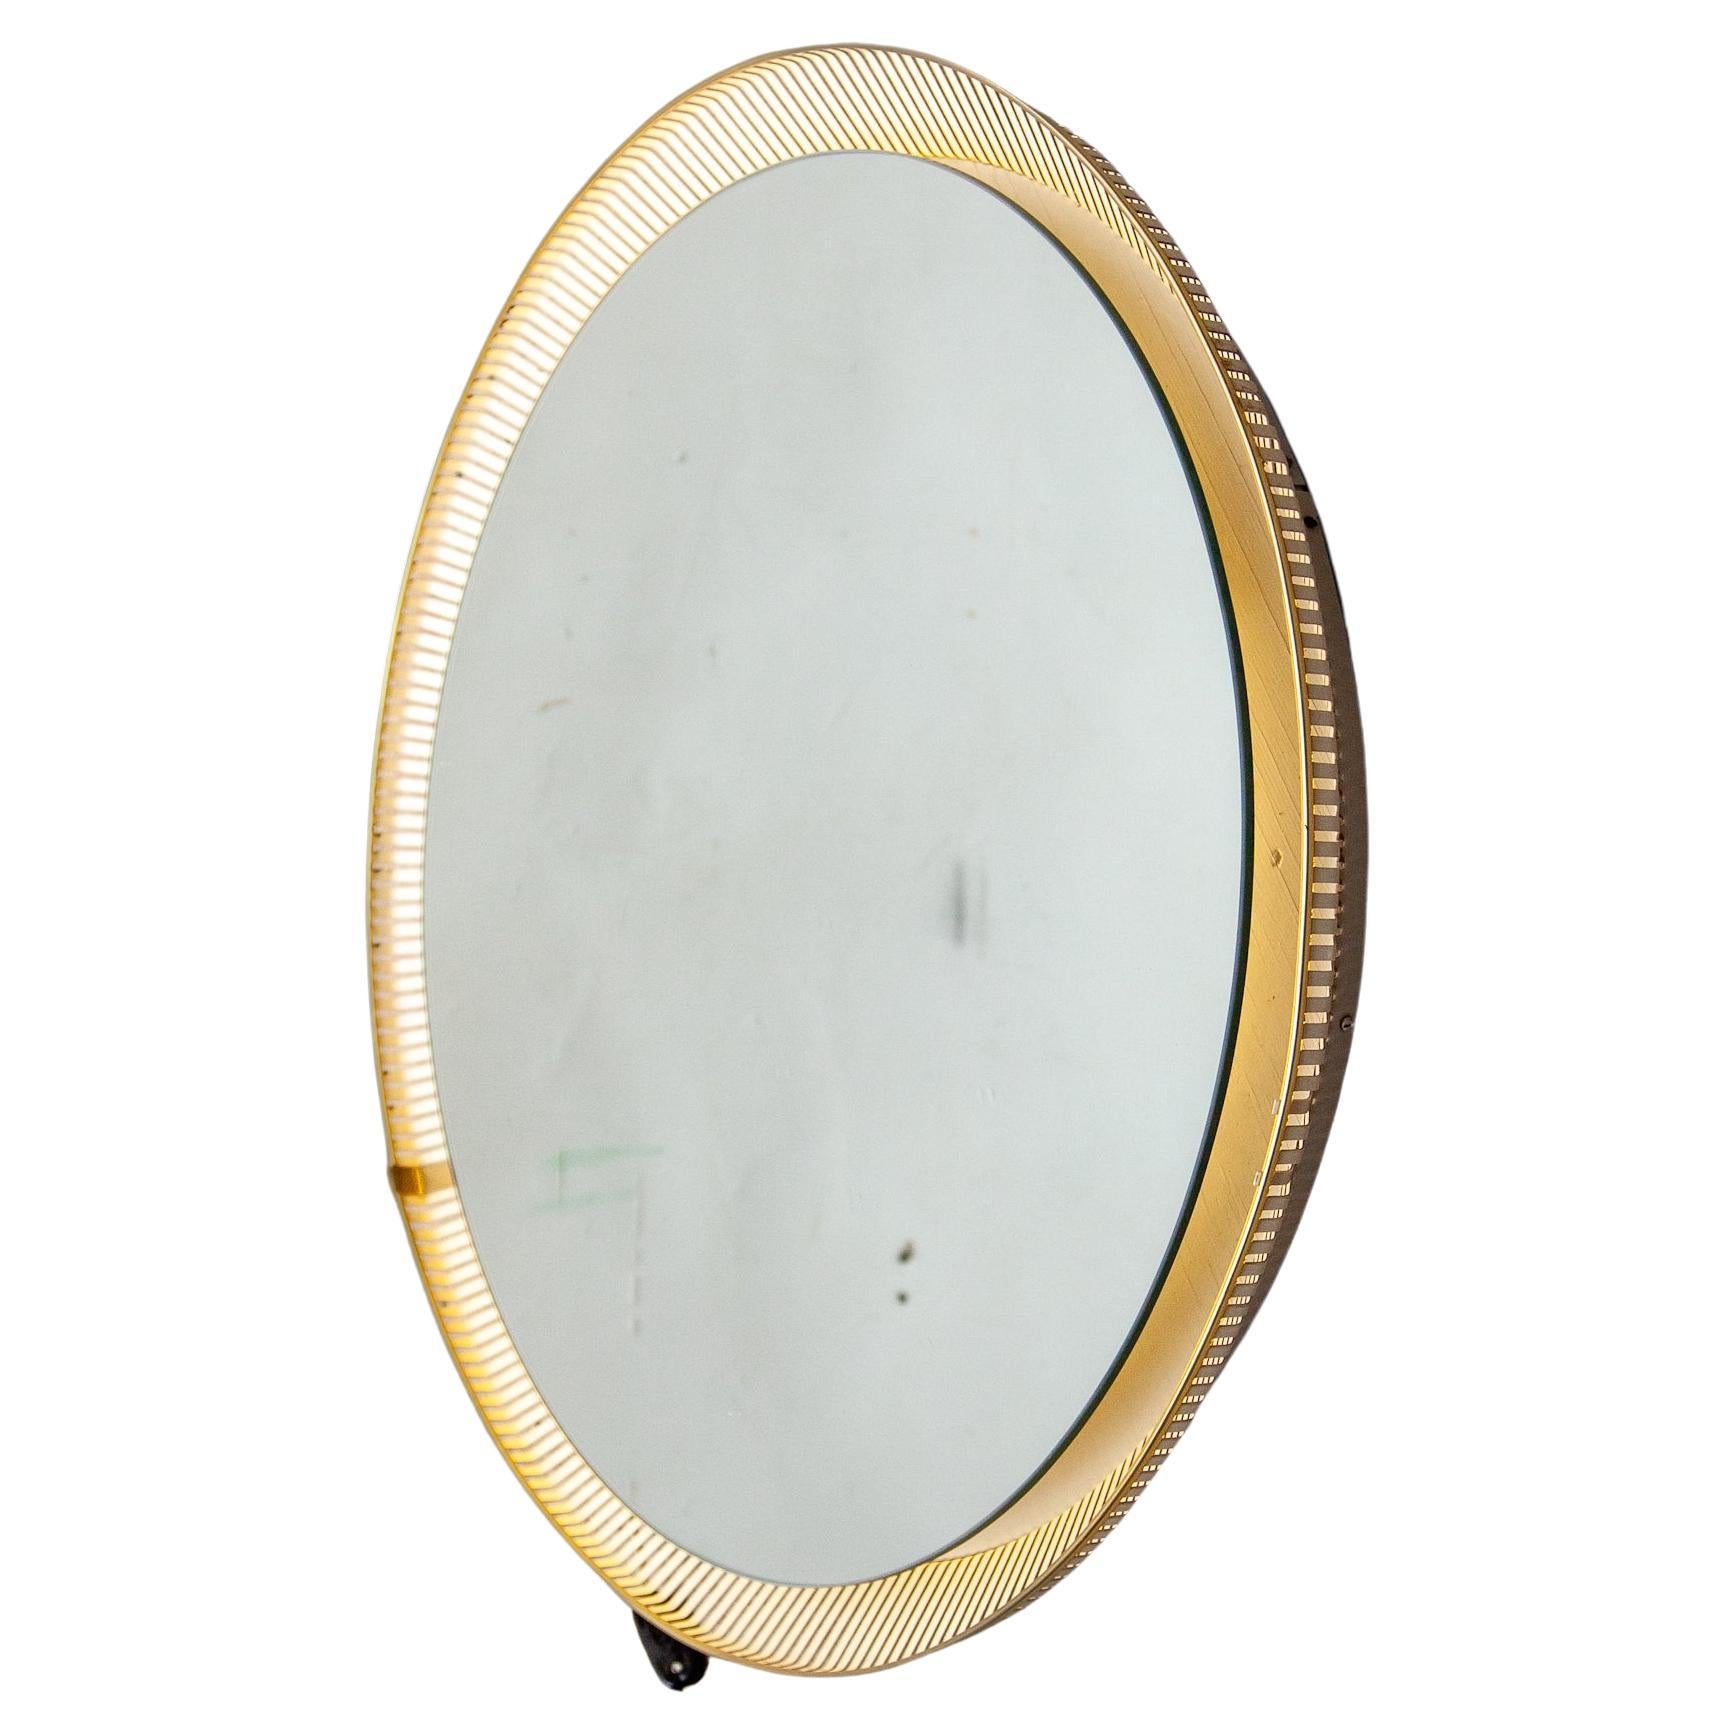 A beautiful round wall mirror perforated white metal base that holds three bulbs. The mirror with background lighting, designed in the Fifties by Mathieu Matégot and produced by Artimeta the Netherlands . The mirror works with a pull switch. An eye